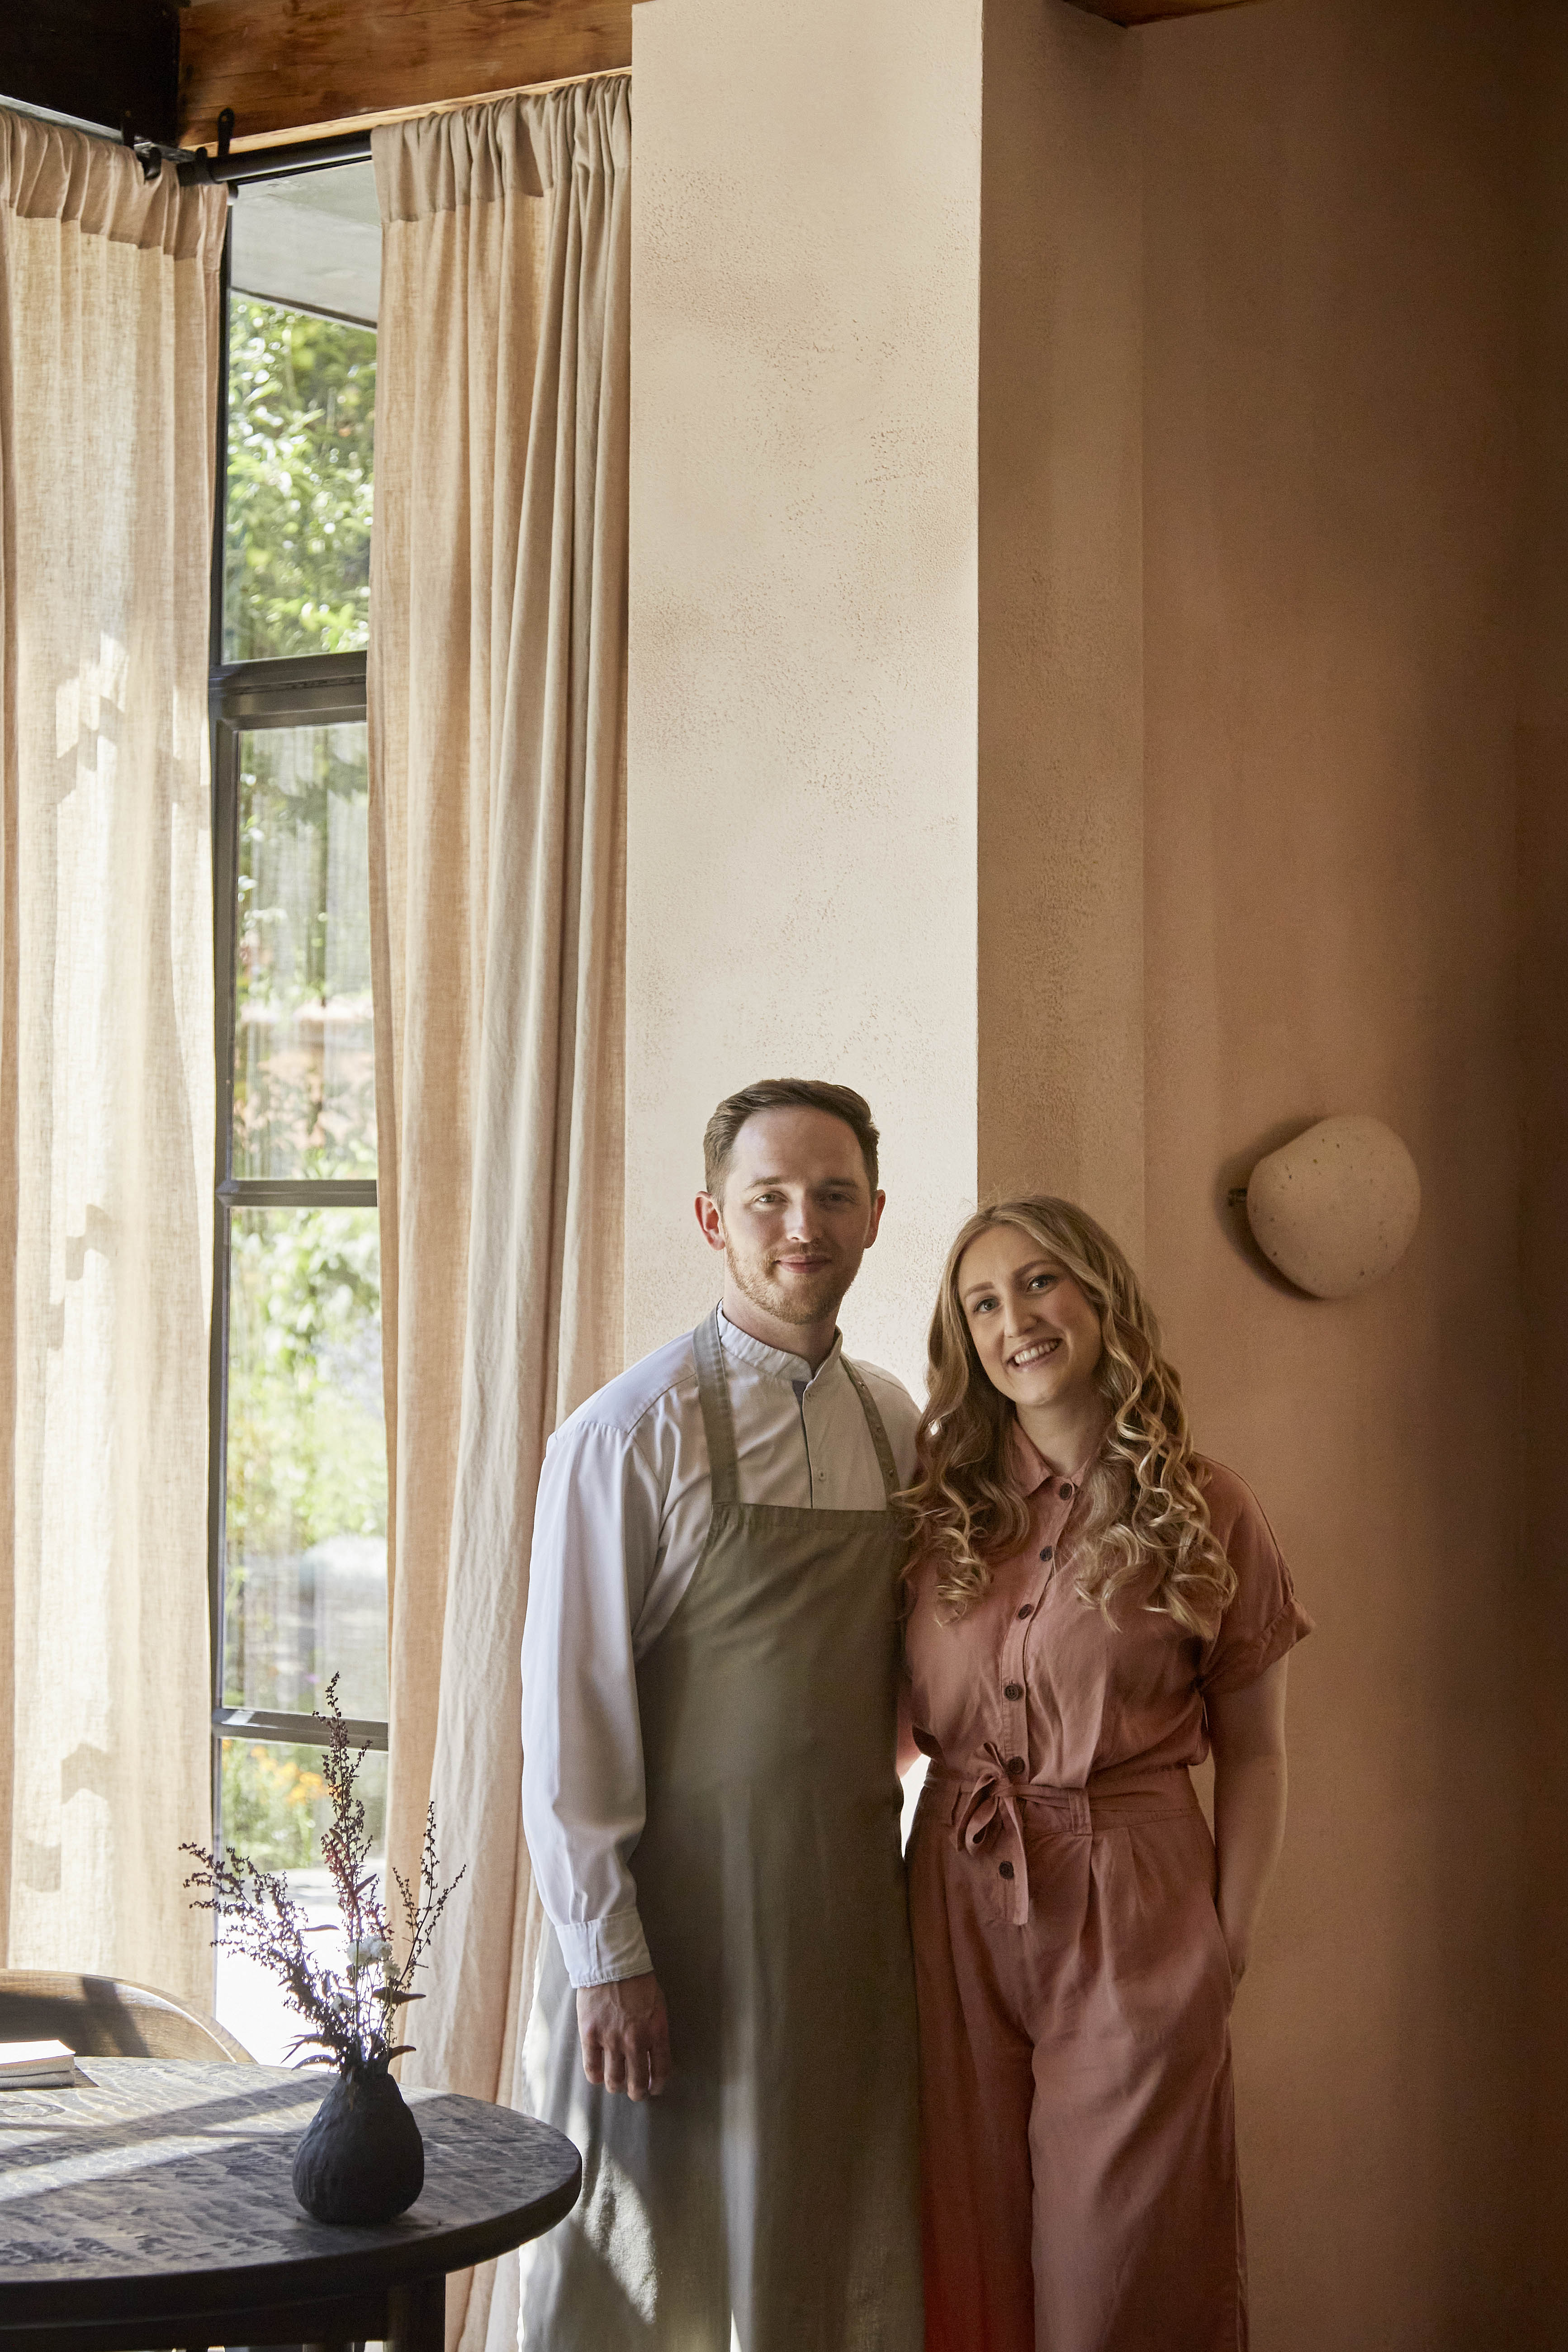 David and Anette Taylor, who run Grace & Savour restaurant at Hampton Manor